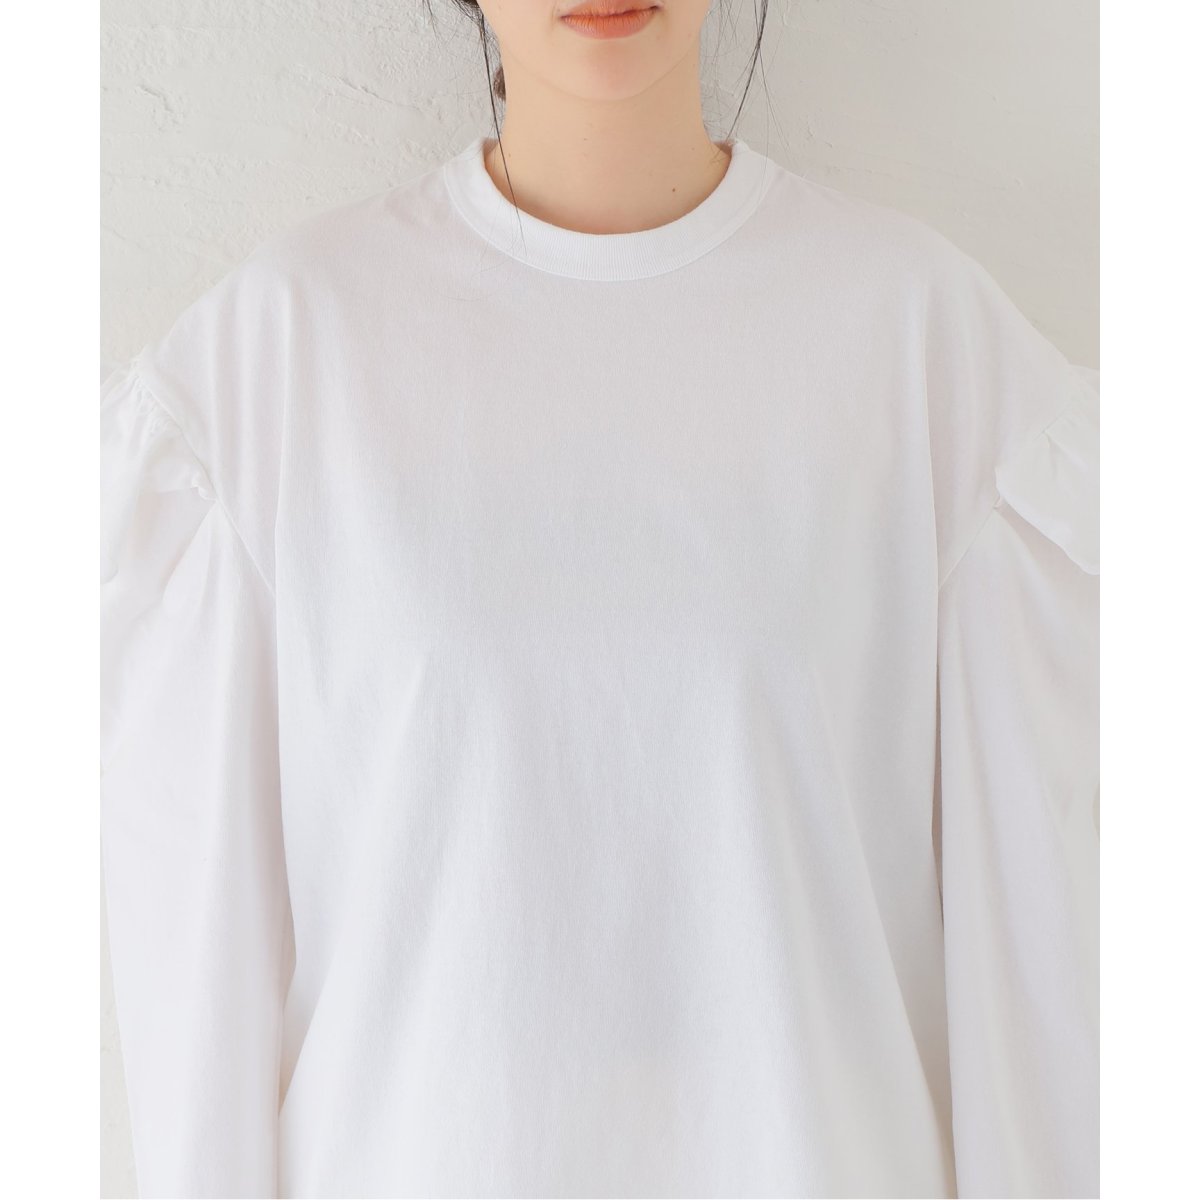 HOLIDAY/ホリデイ】SUPER FINE DRY SHELL L/S TOPS:カットソー 